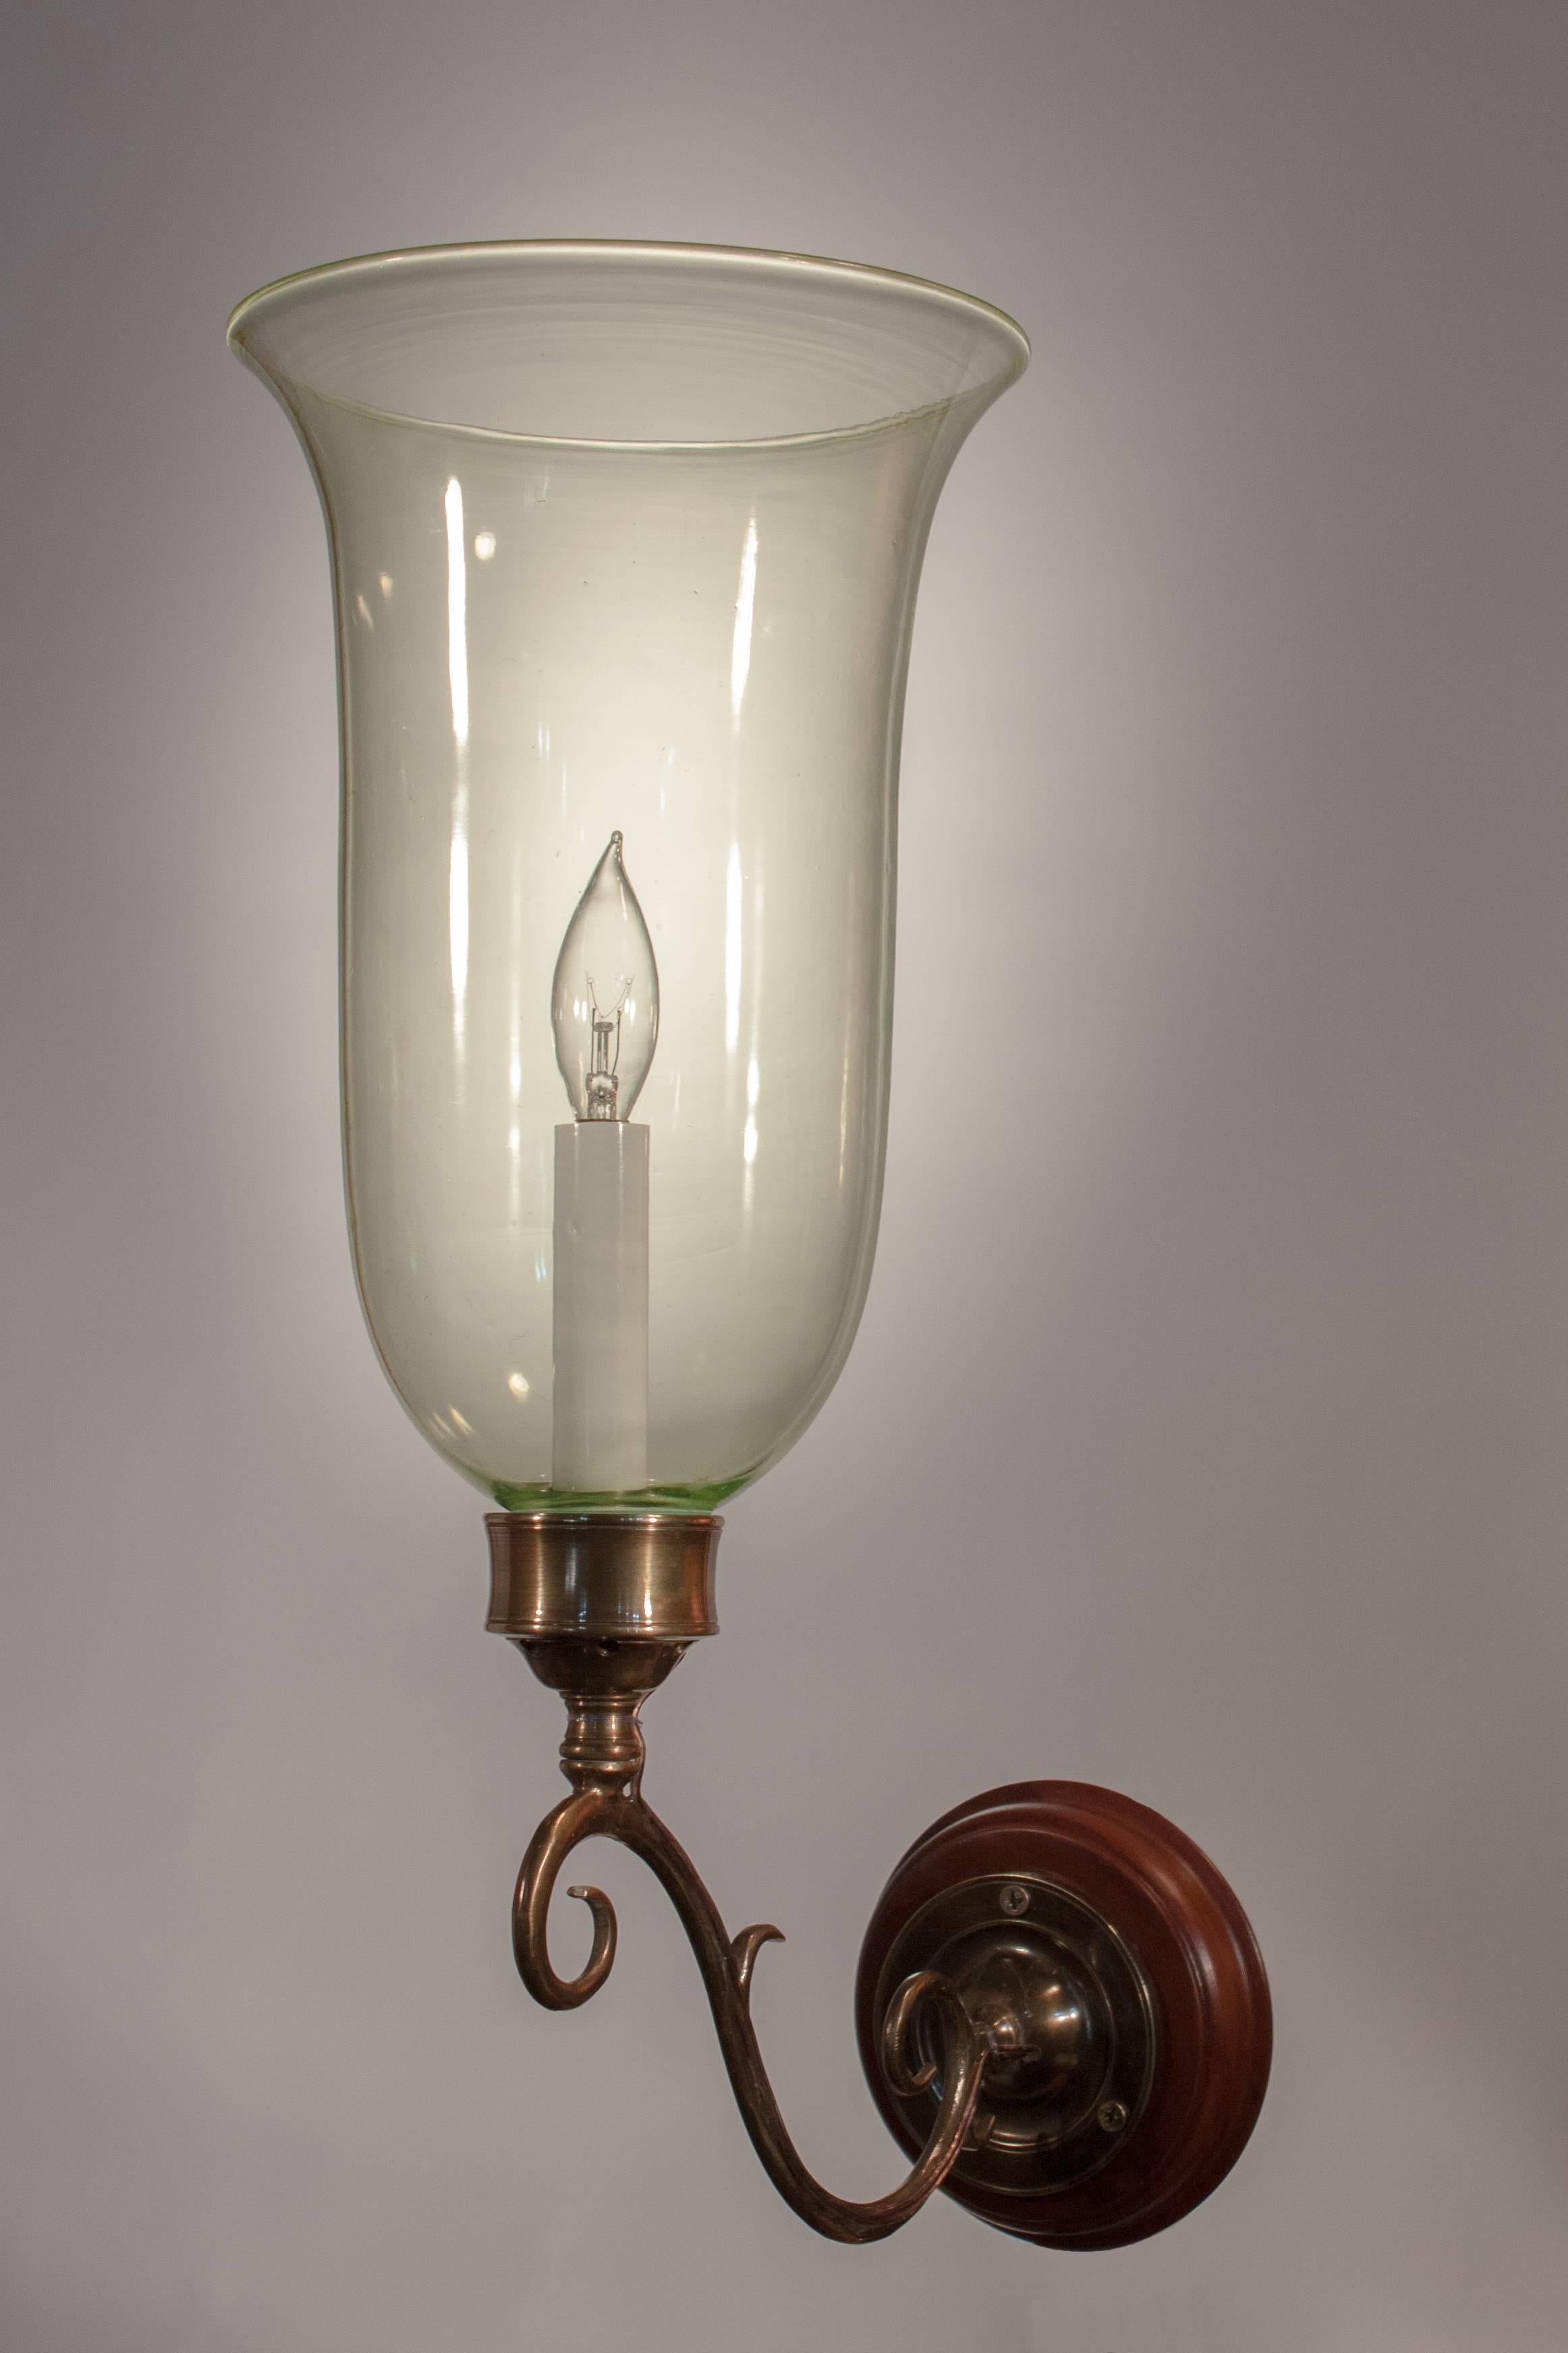 Regency Pair of 19th Century English Hurricane Shade Sconces with Vaseline Tint